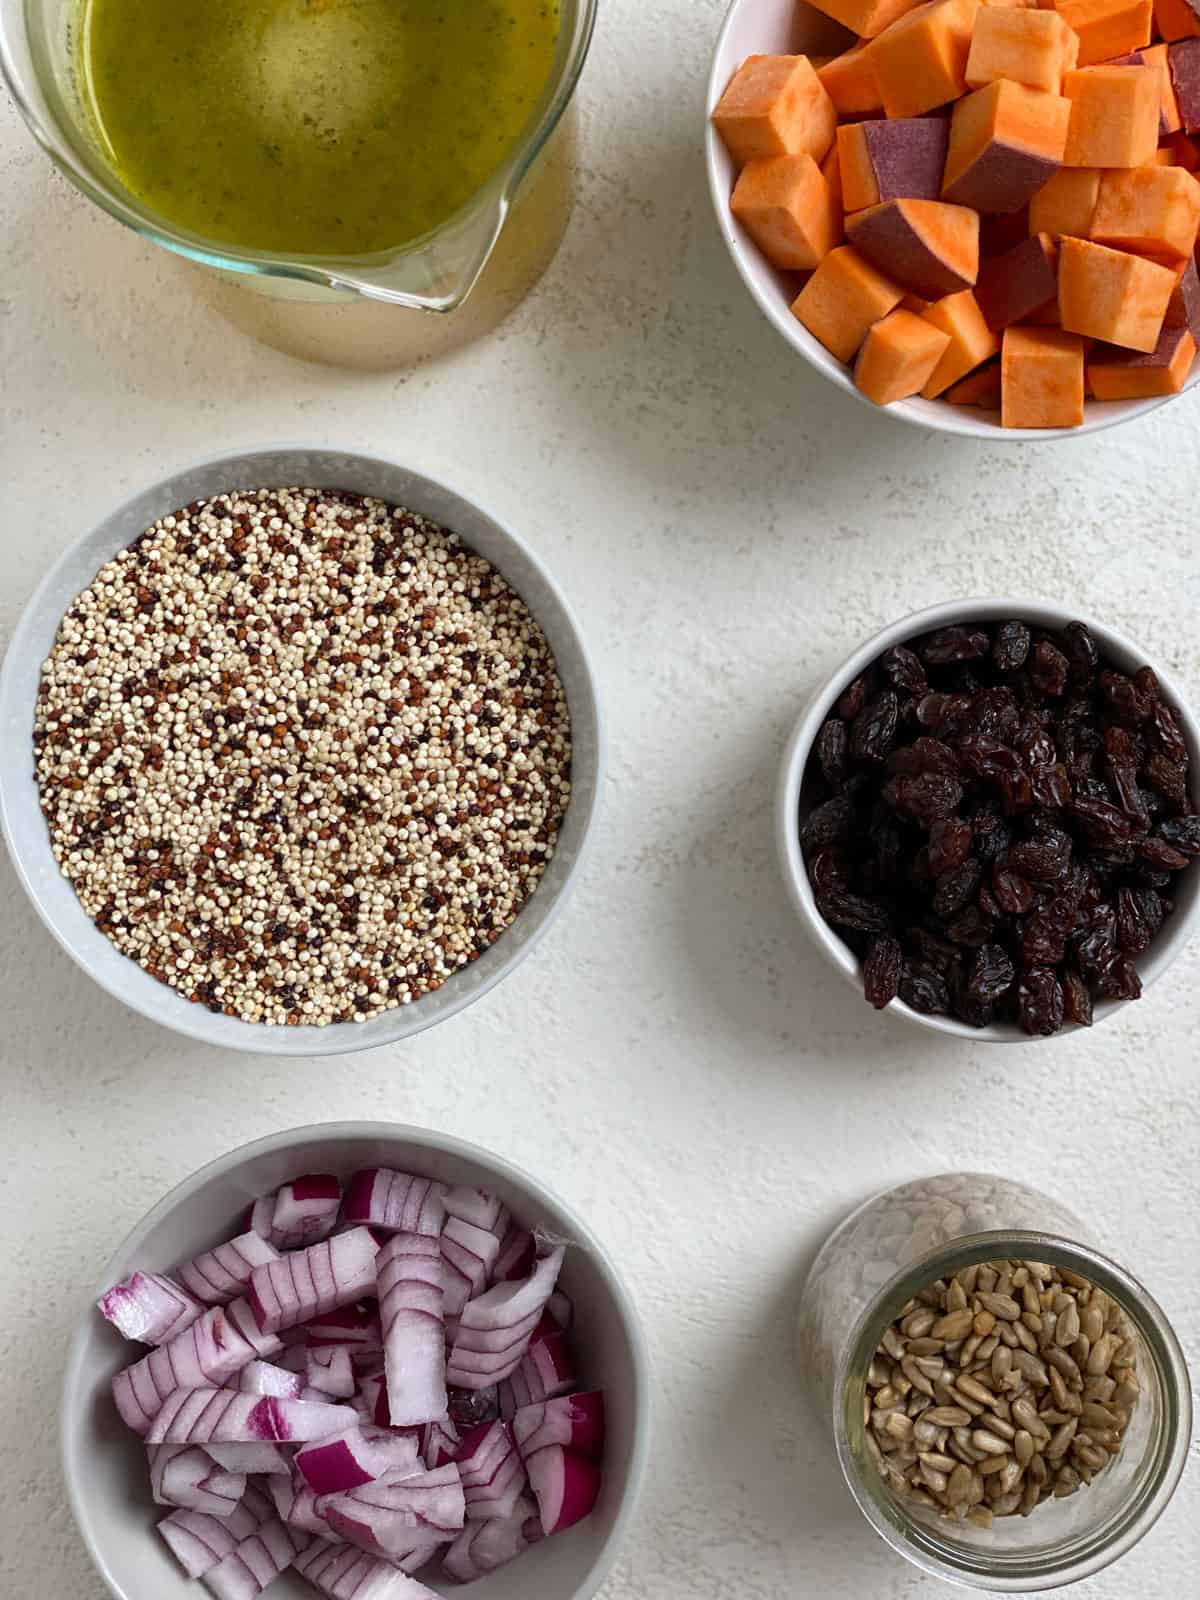 ingredients for Sweet Potato Quinoa Bowl measured out against a white surface